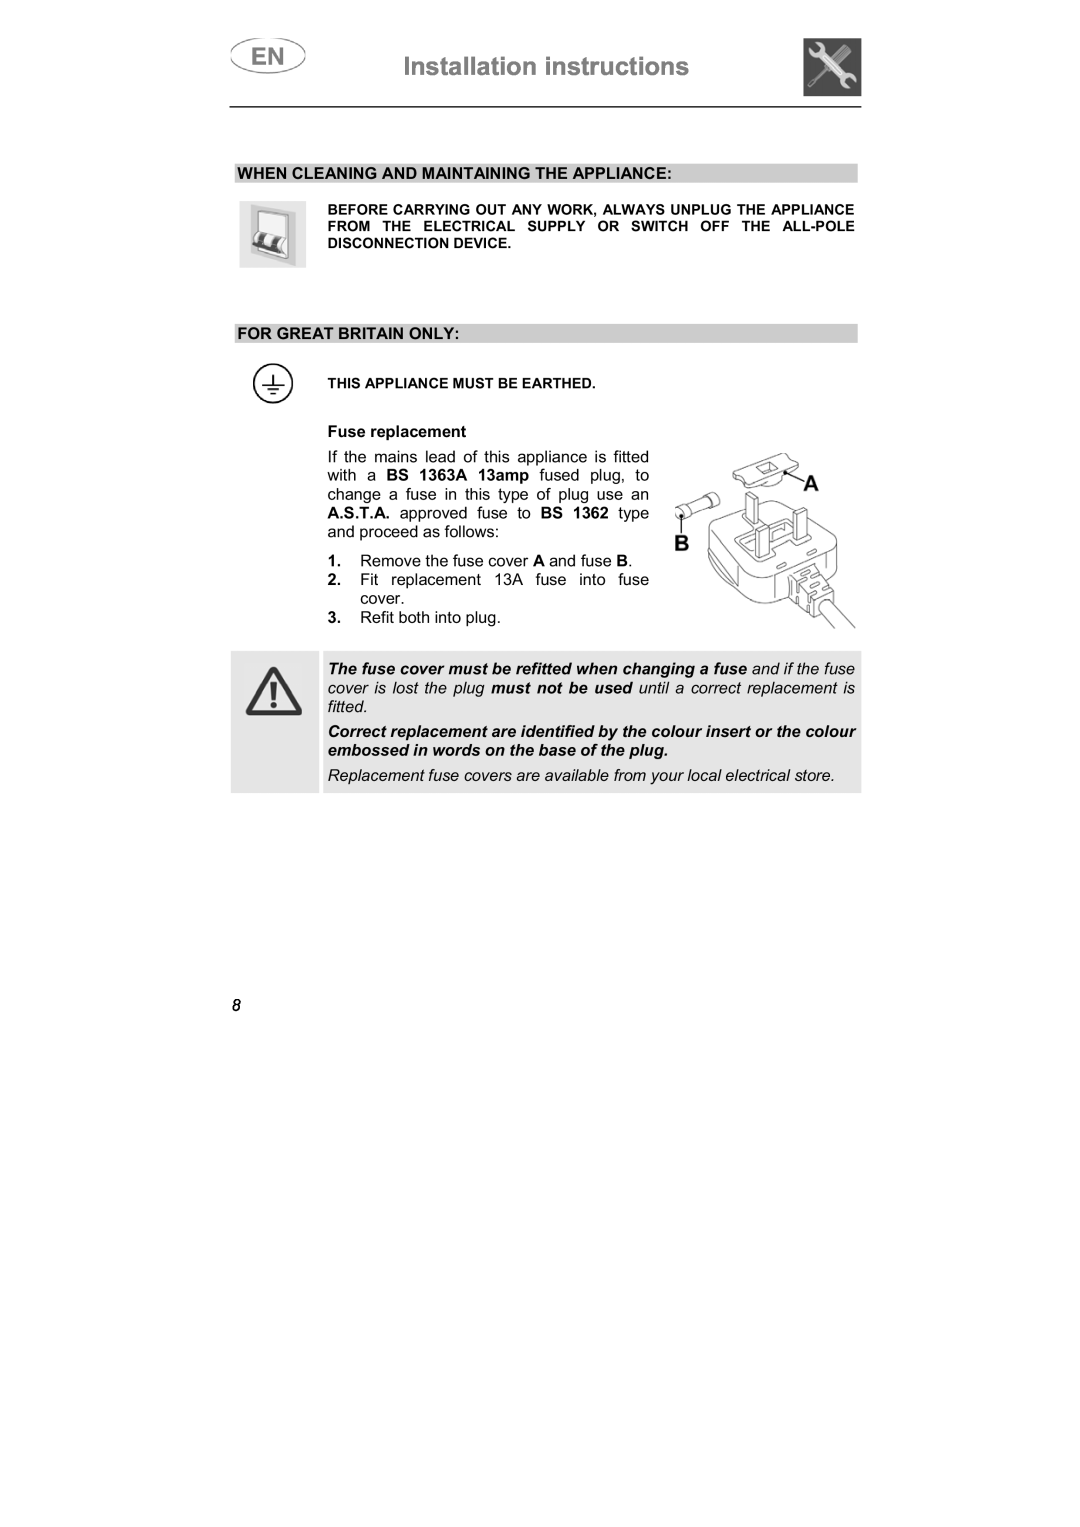 Smeg LSPX1253 manual Installation instructions, When Cleaning And Maintaining The Appliance, For Great Britain Only 